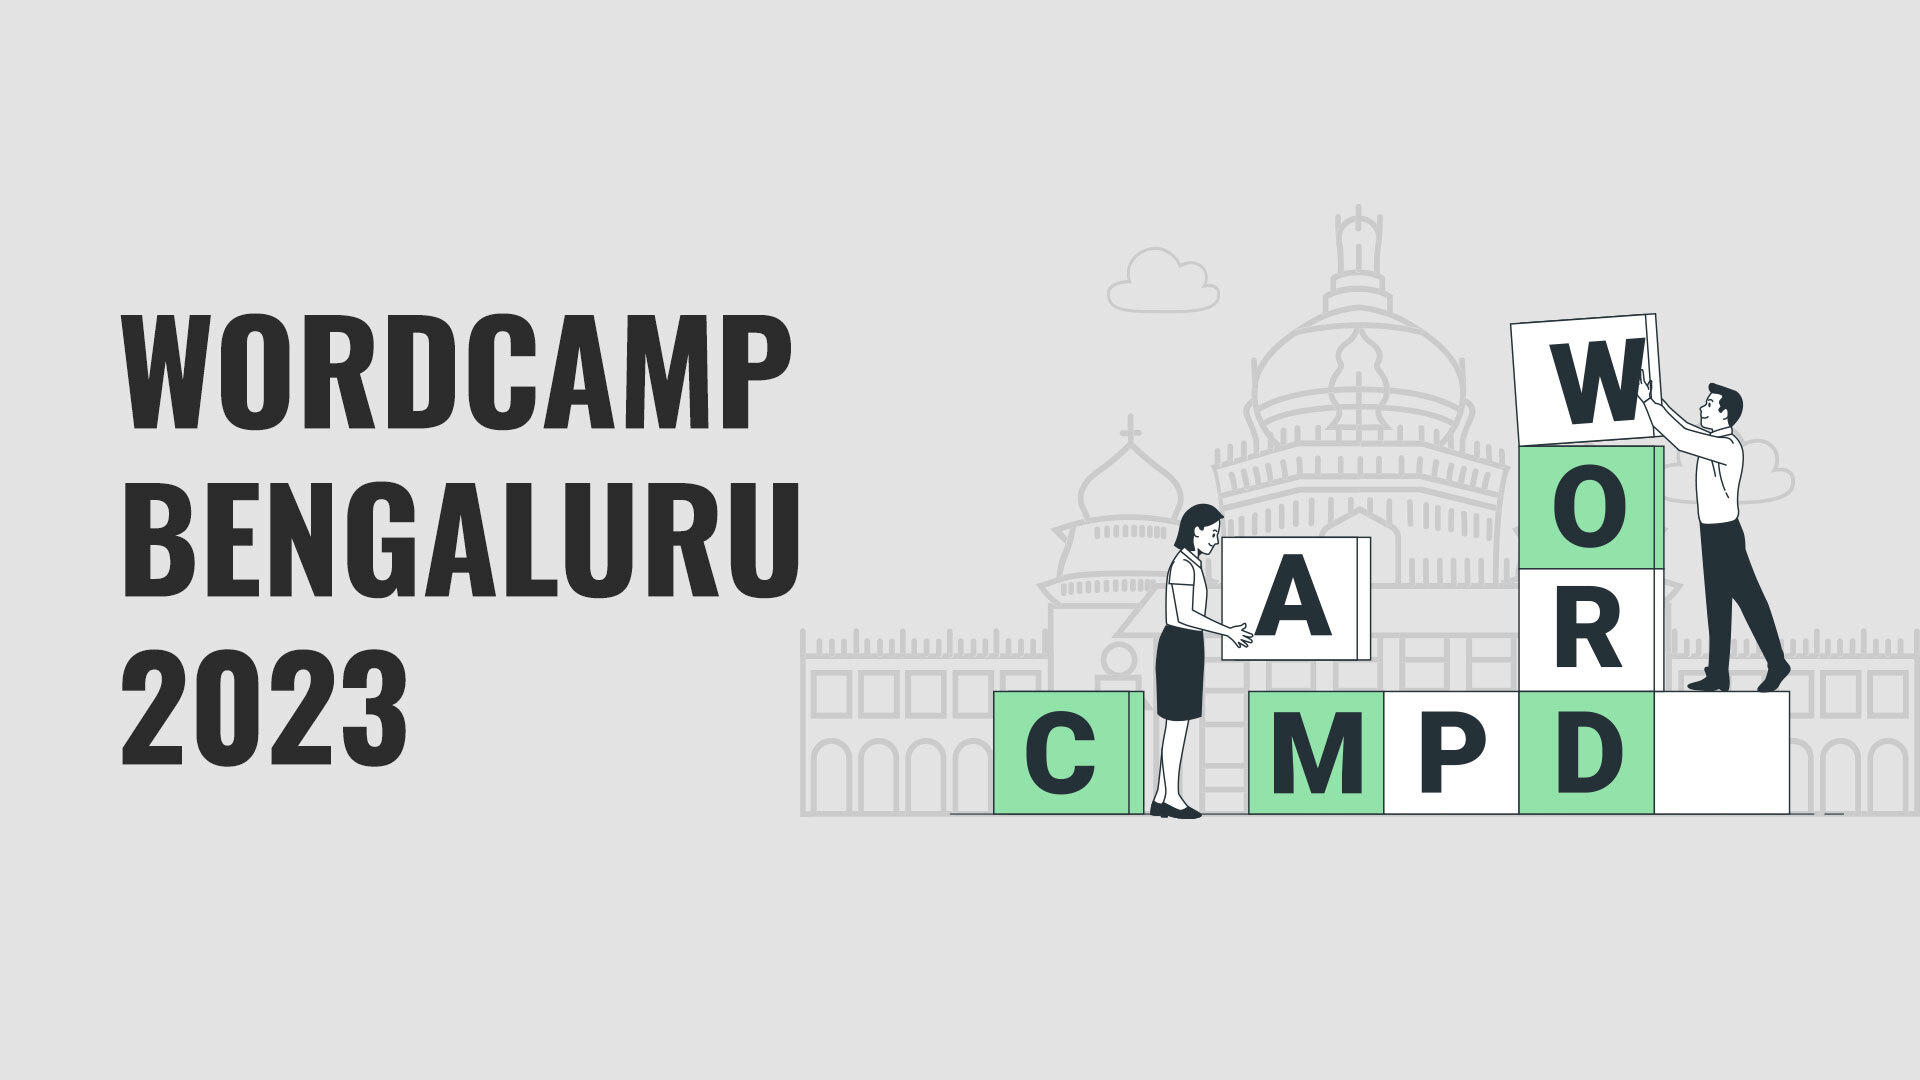 WordCamp Bengaluru 2023 is Almost Here! We Are Going, Are You?